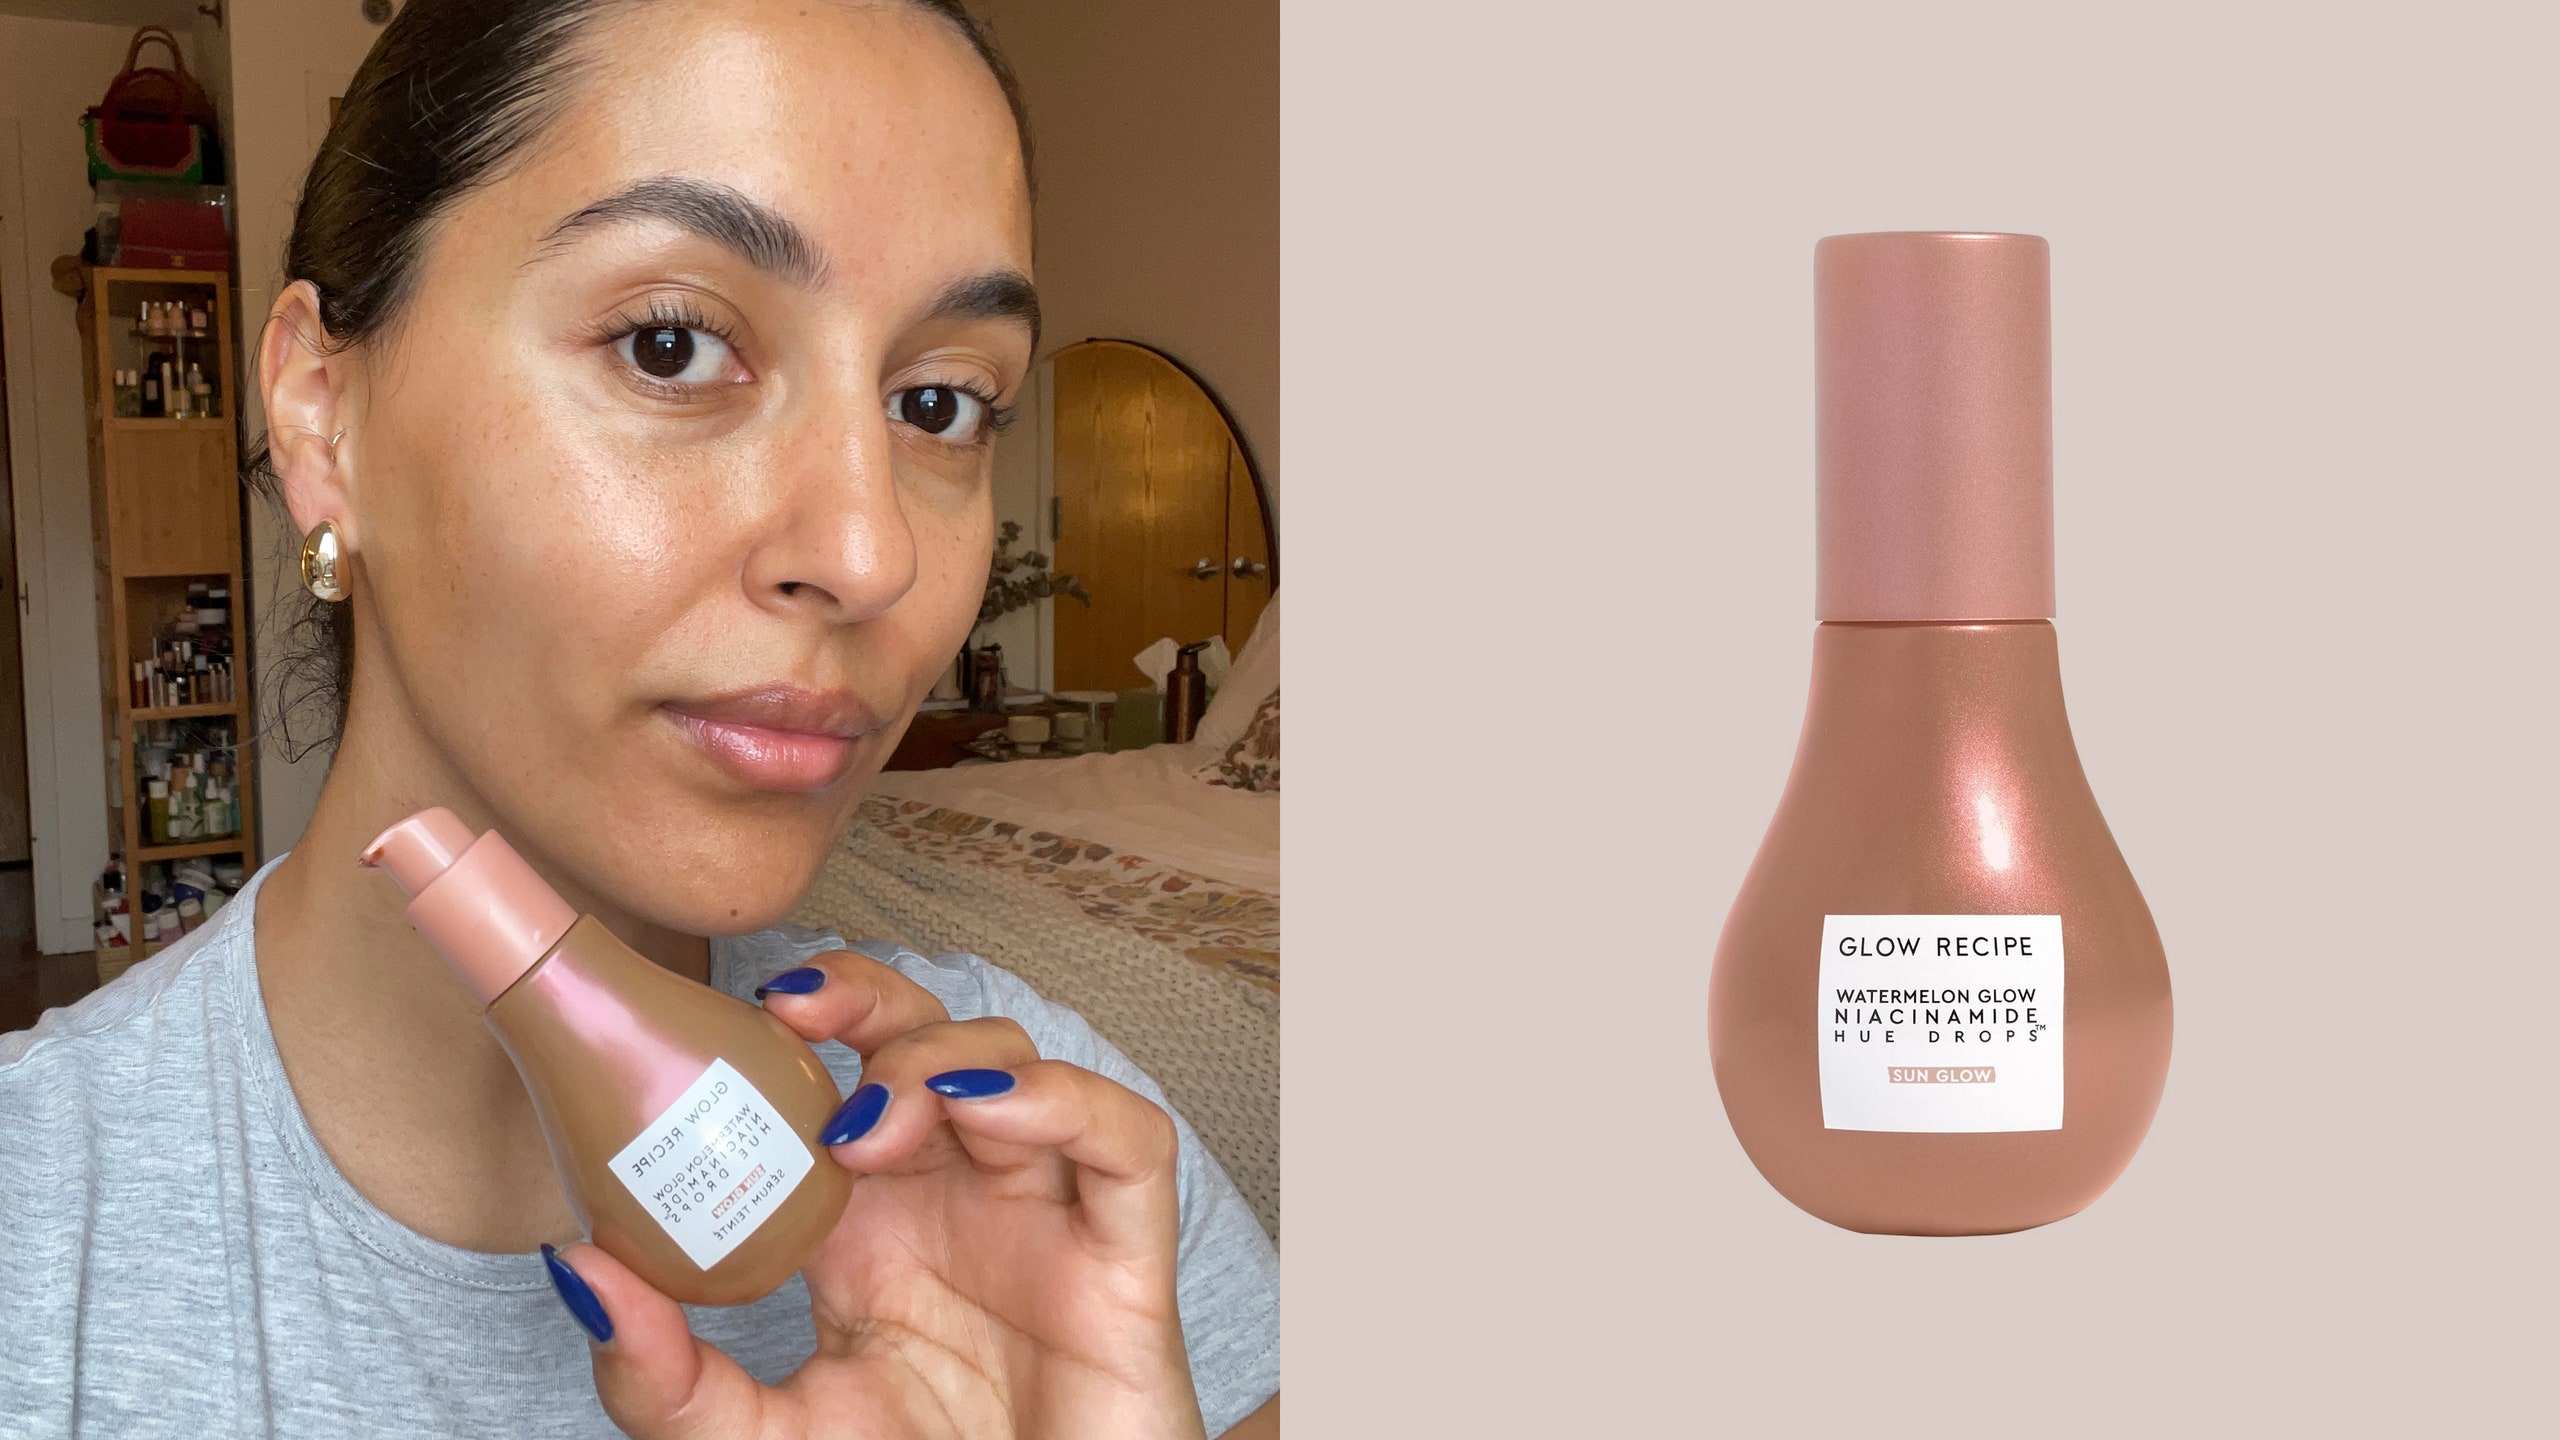 A woman holding a bottle of a bronzed serum next to a close up photo of the bottle on a tan background